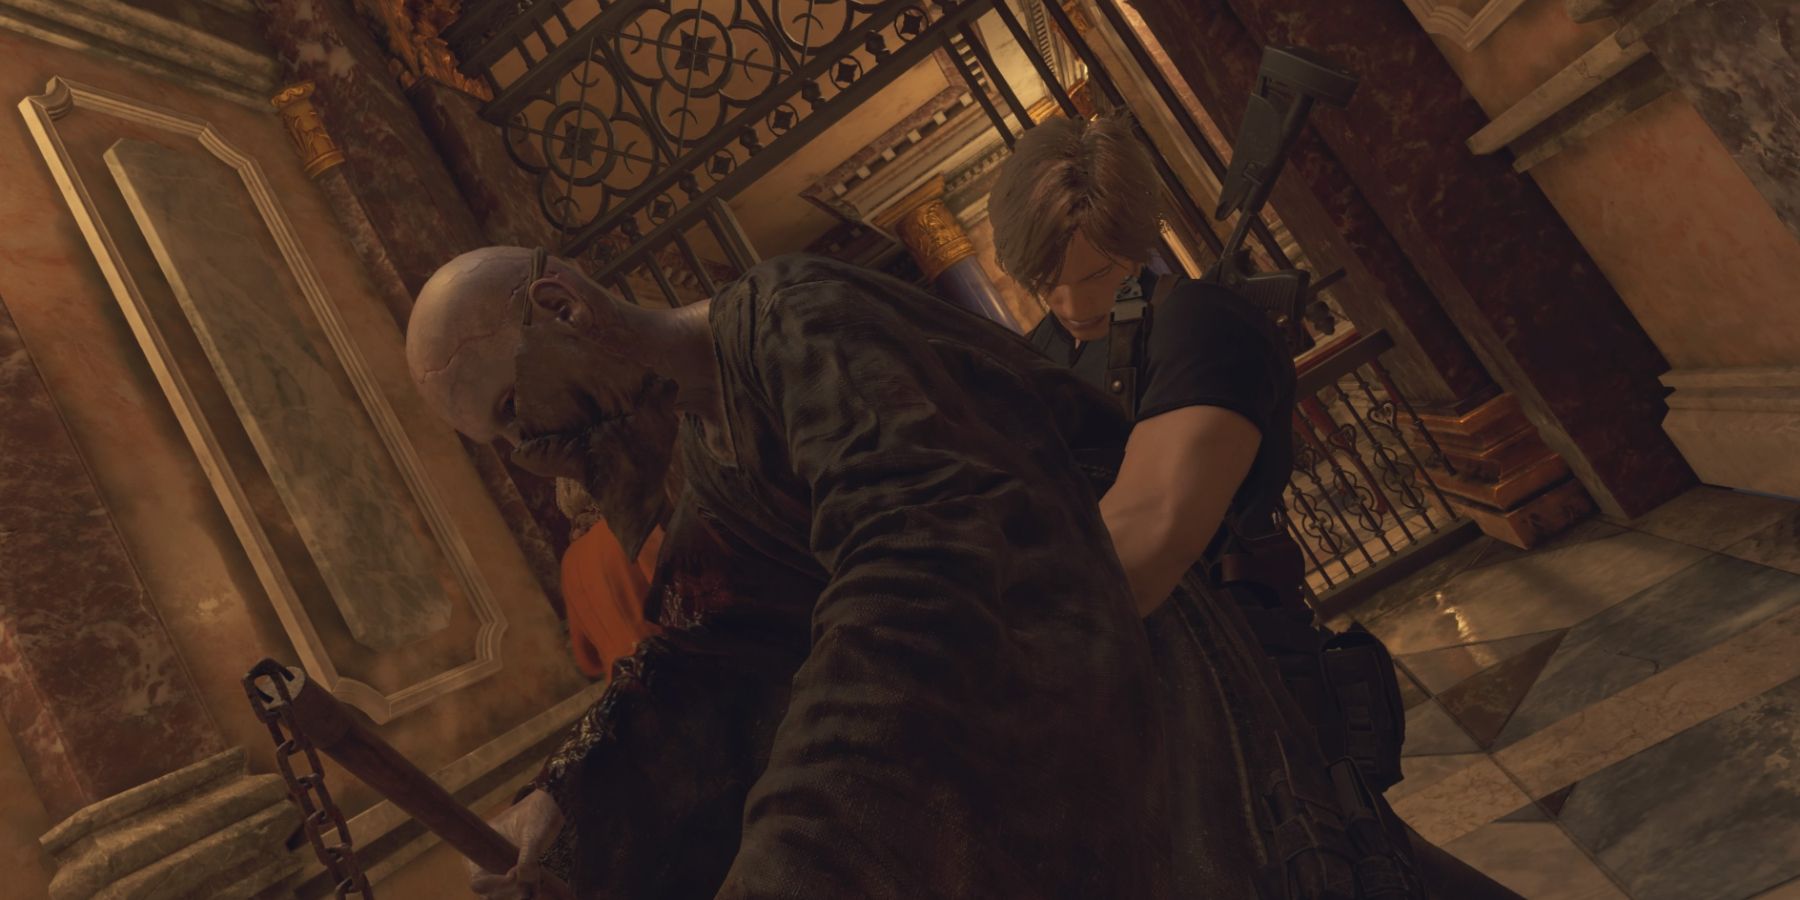 Leon grabs a Cultist in Resident Evil 4 remake